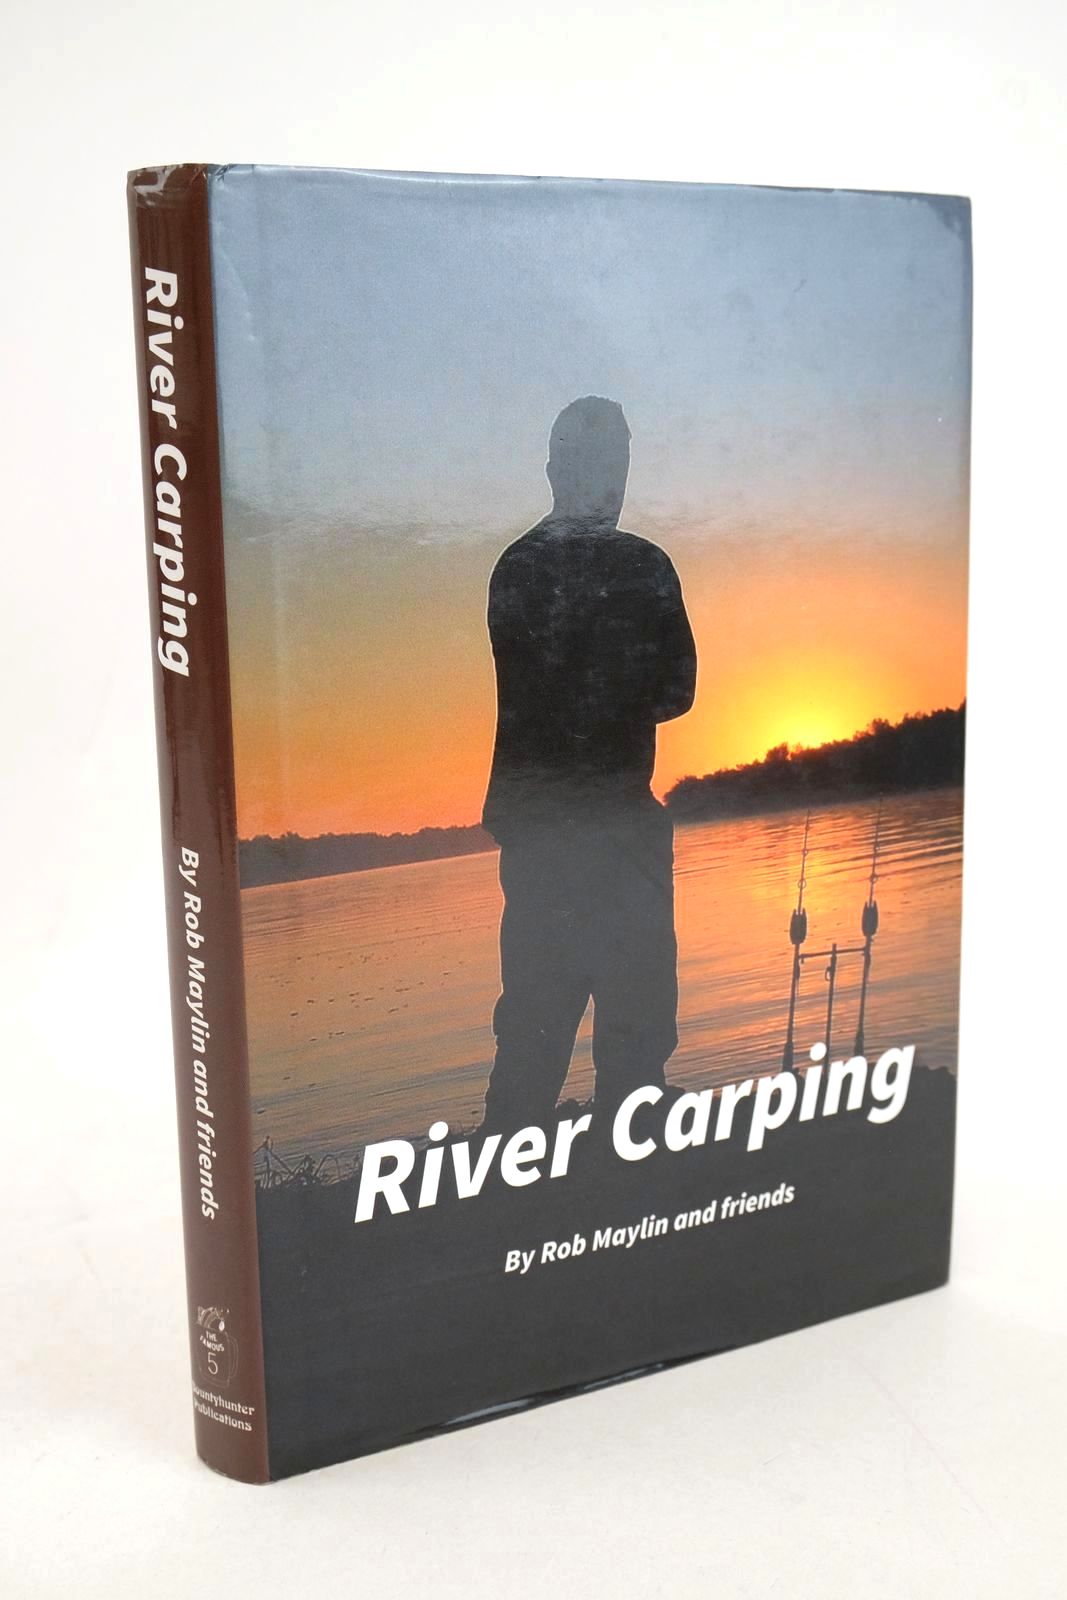 Photo of OFF THE BEATEN TRACK... RIVER CARPING written by Maylin, Rob et al, published by Bountyhunter Publications (STOCK CODE: 1327610)  for sale by Stella & Rose's Books